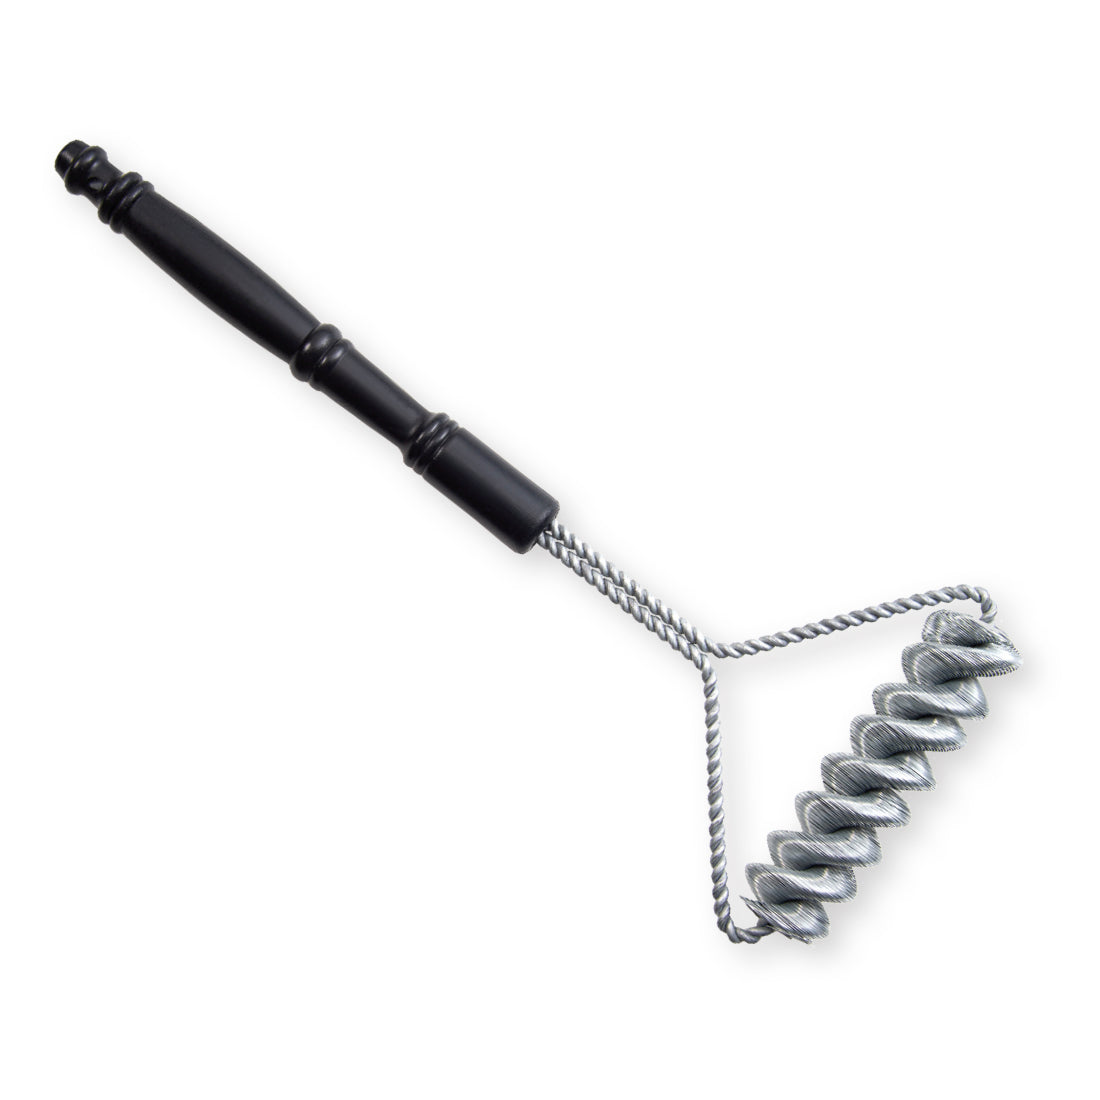 Onion Holder Grill Brush, Grill Cleaner Brush, BBQ Grill